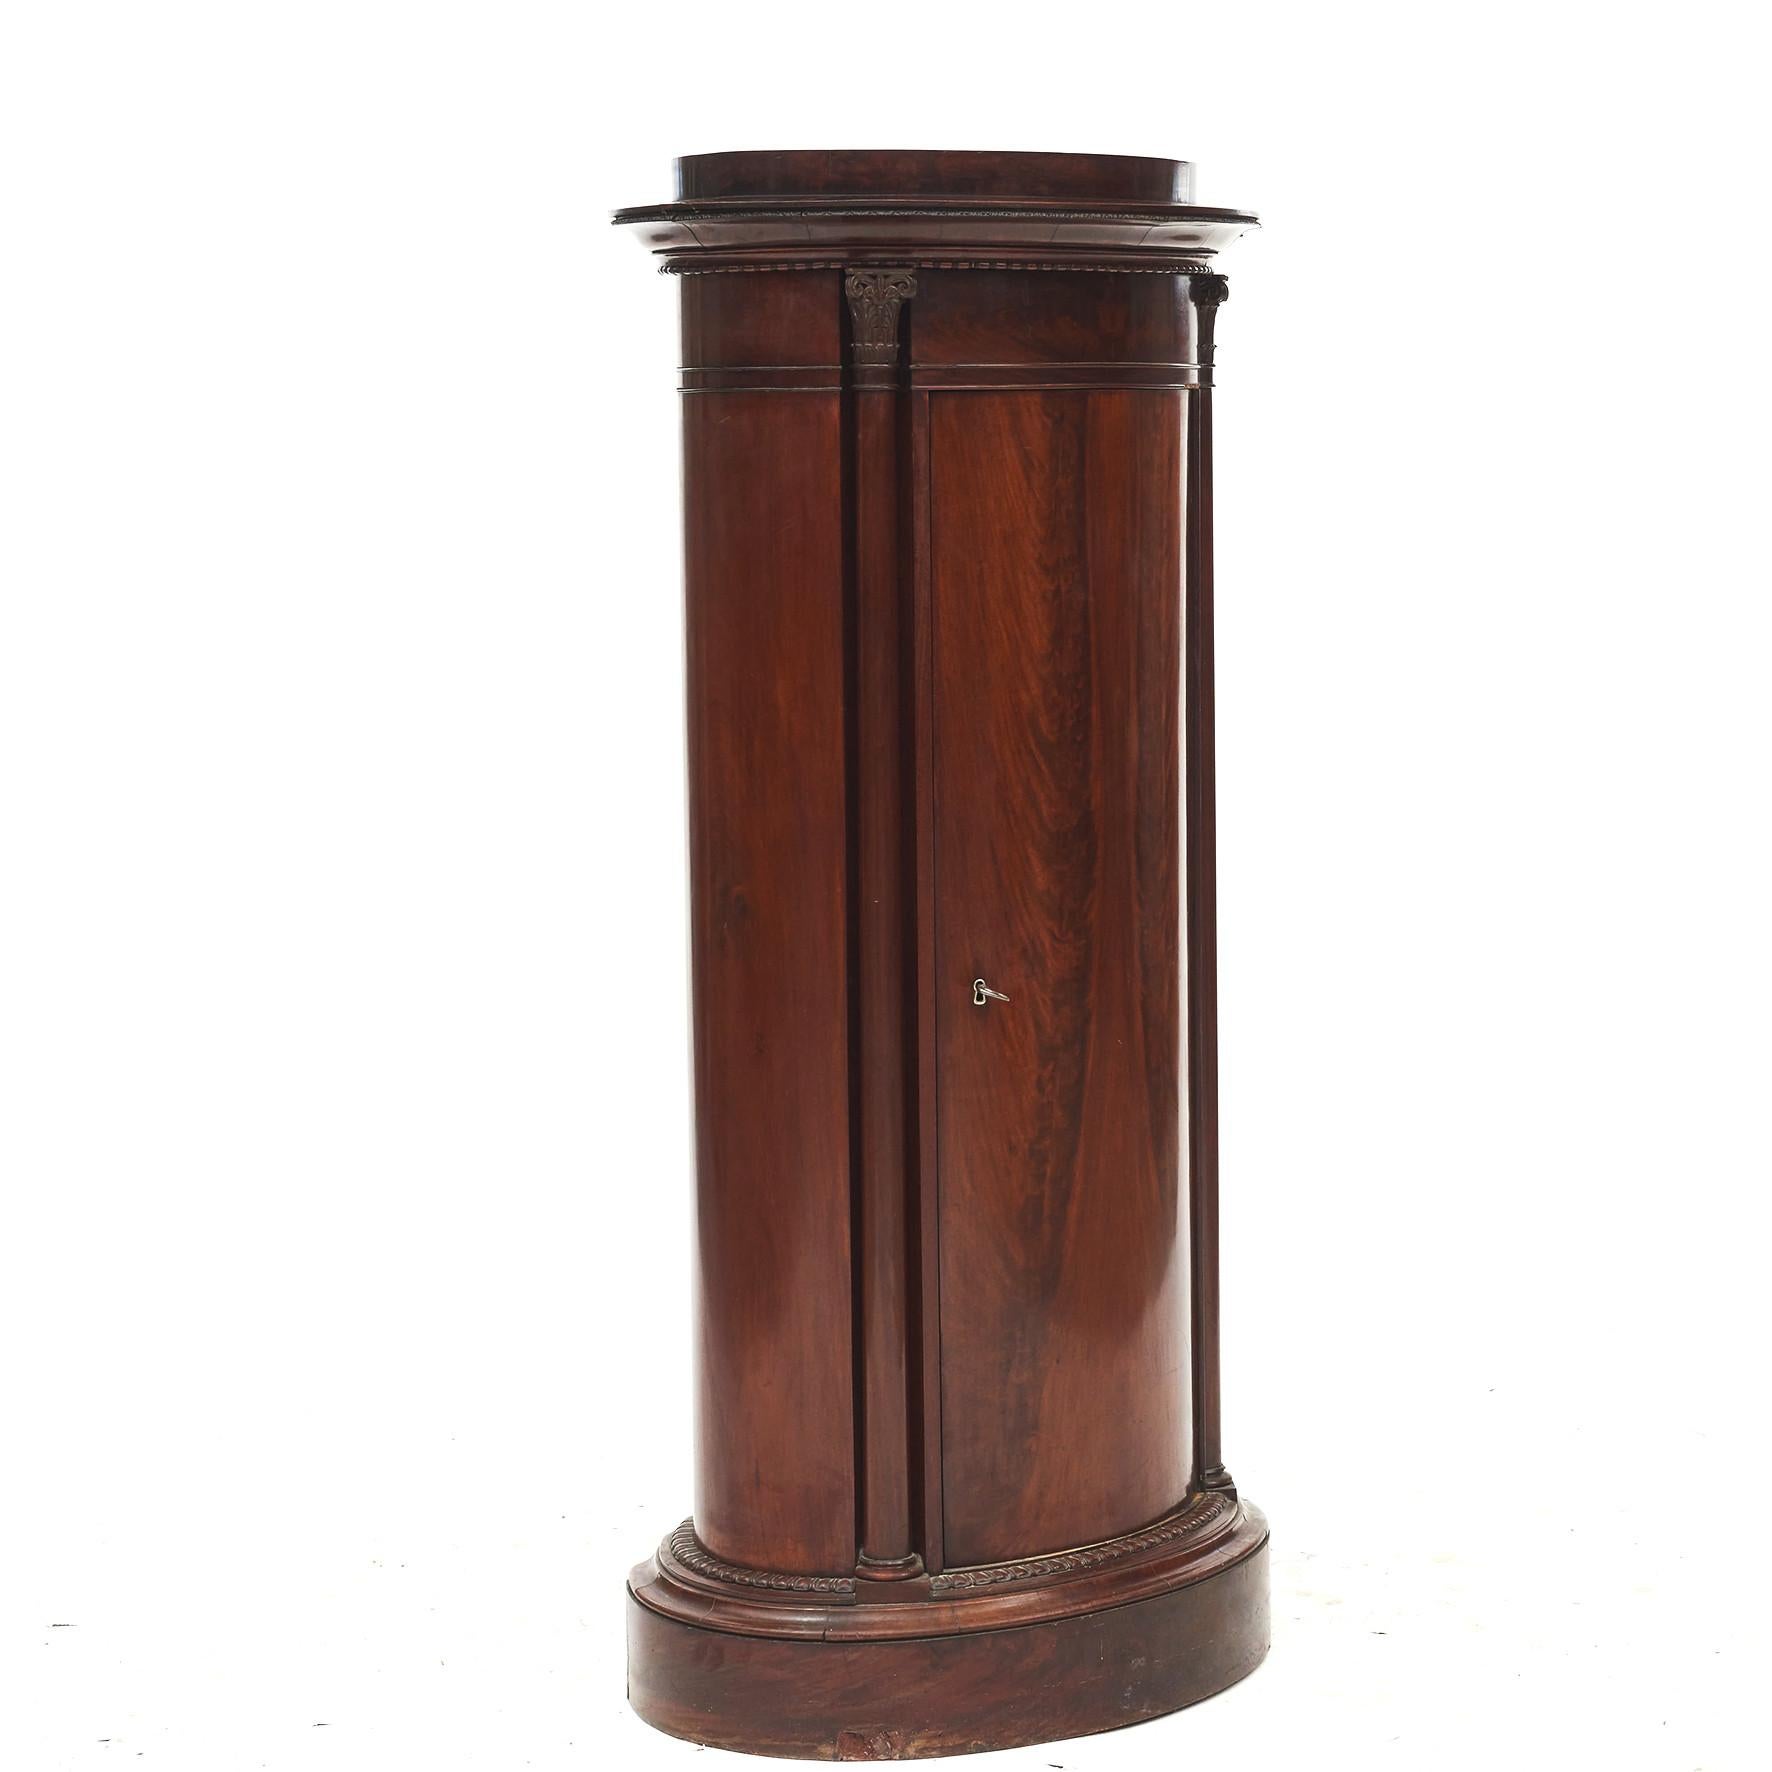 Danish late Empire burl mahogany pedestal cabinet.
Curved single-door cabinet in oval shape.
Door flanked by columns with capitals.
In rare untouched condition.

Copenhagen, Denmark, 1830-1840.